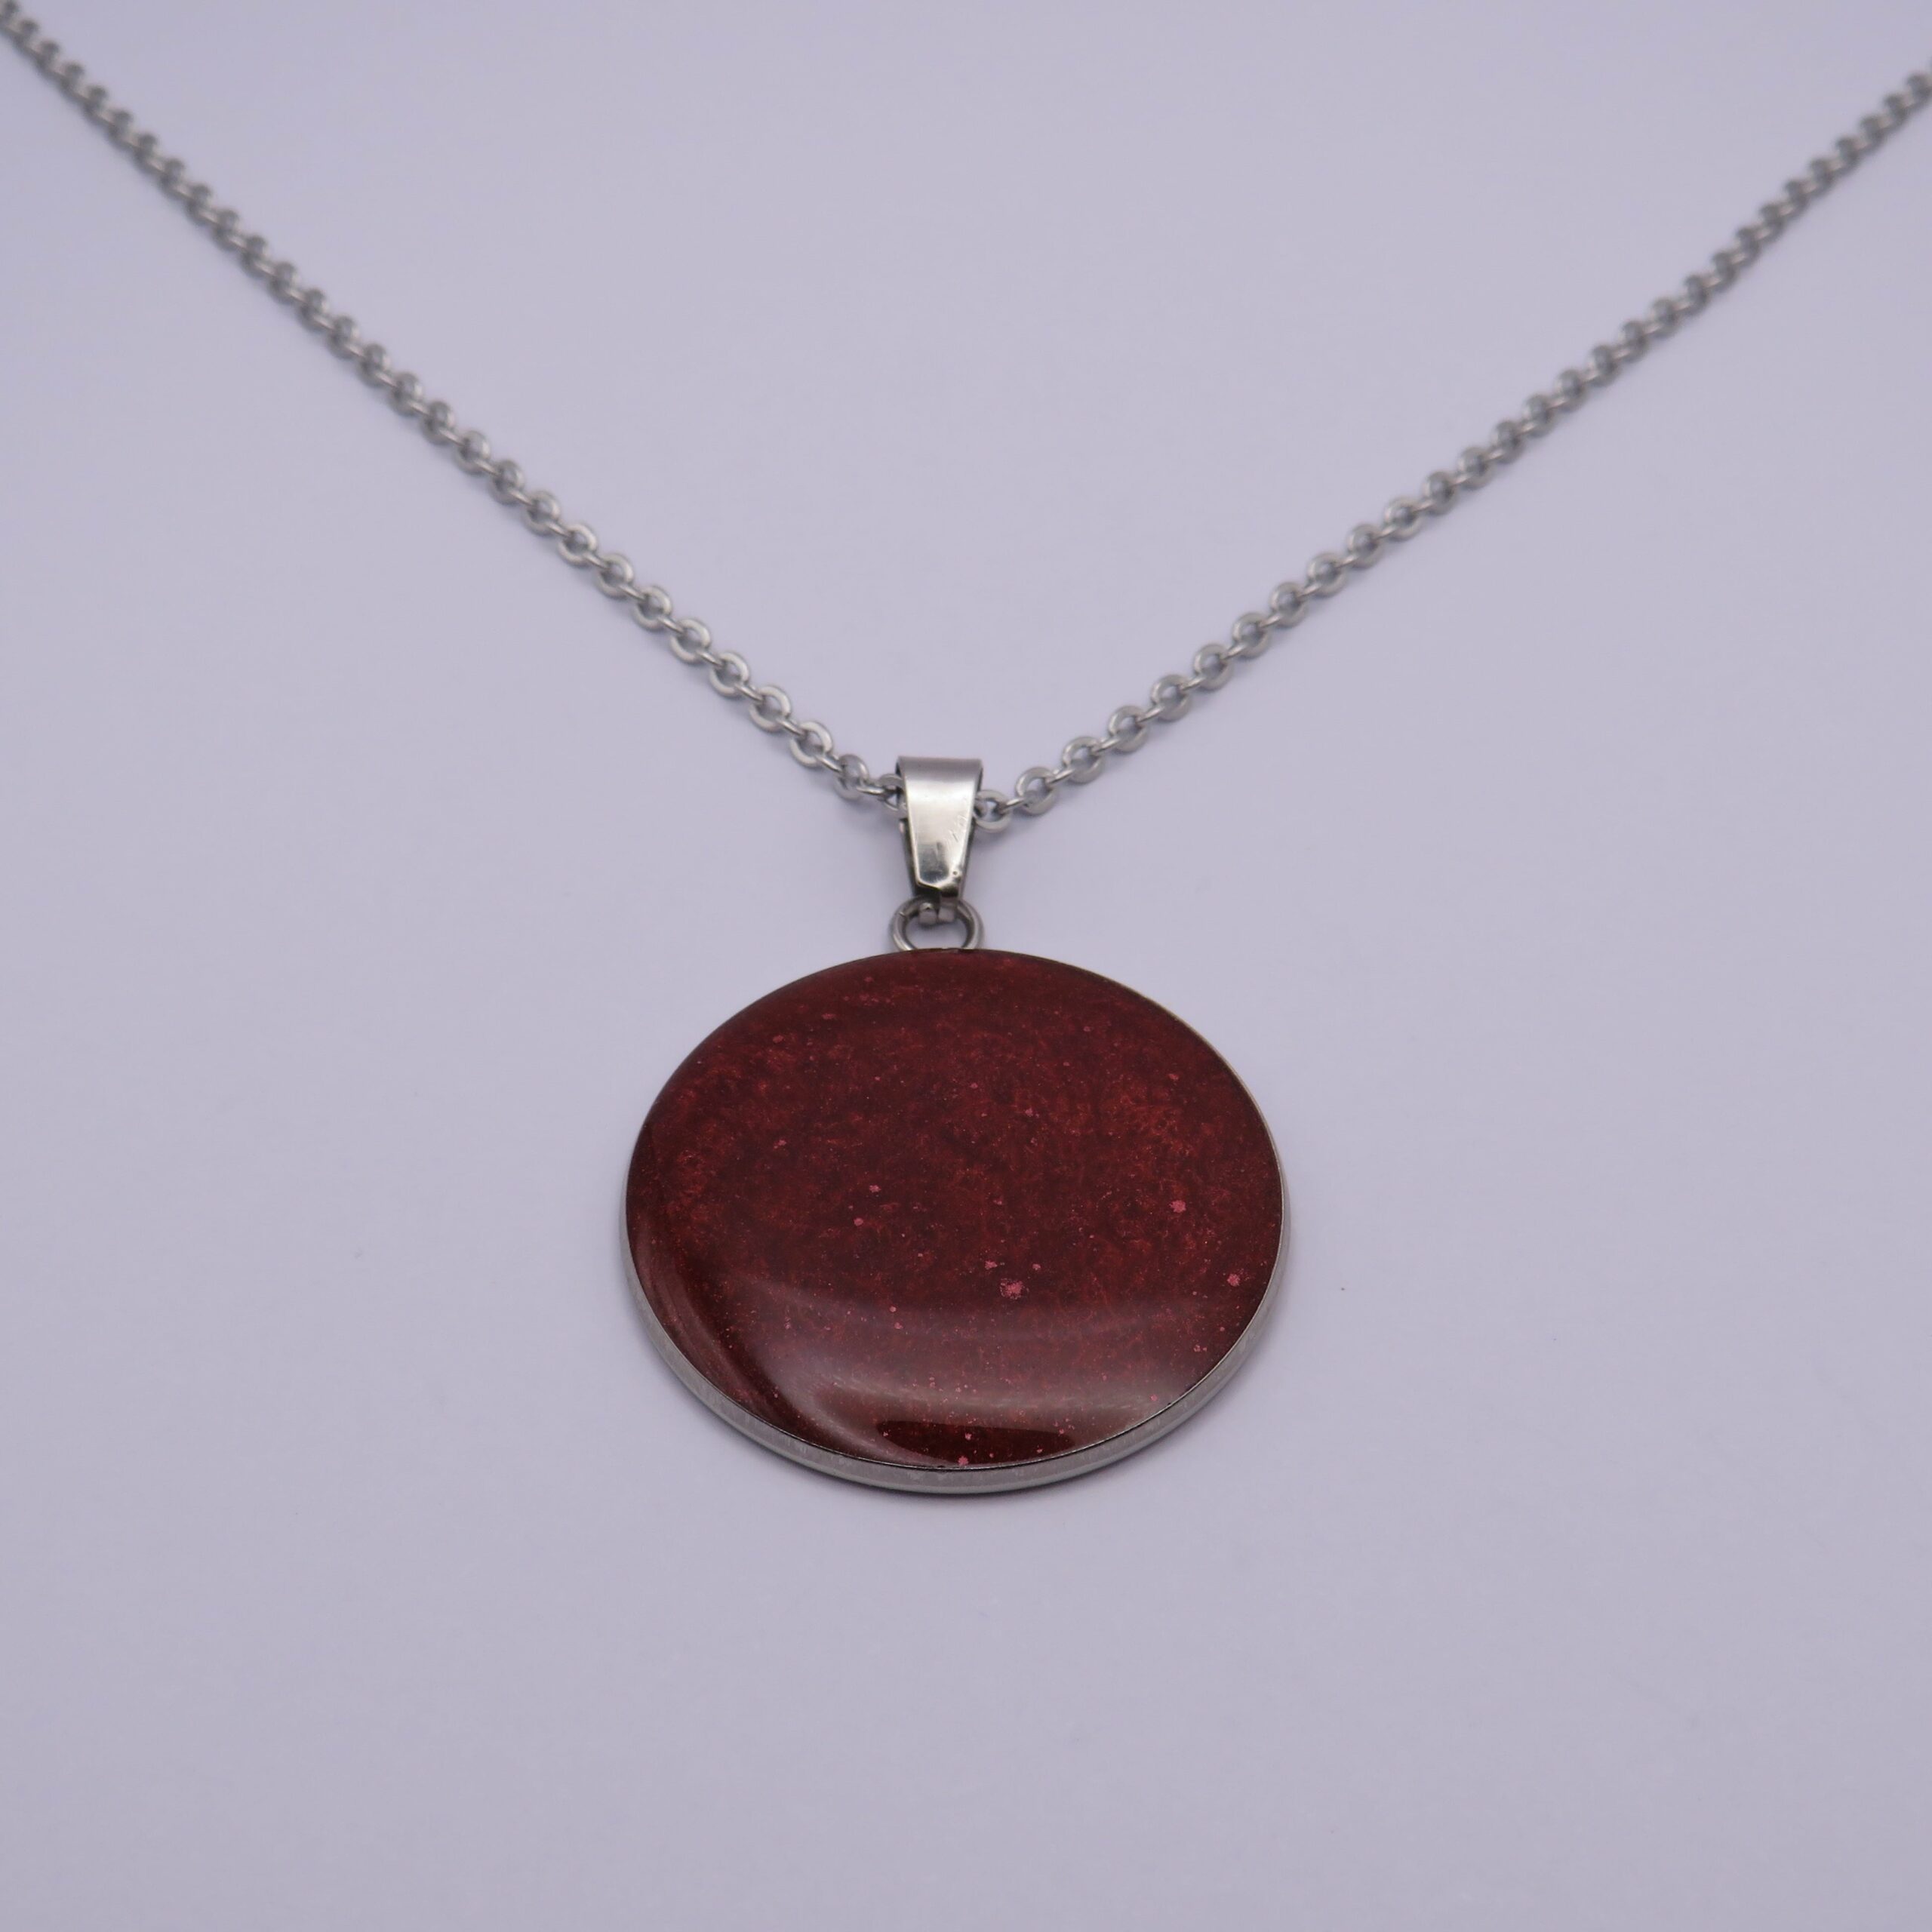 Stainless Steel Long Large Red Cabochon Pendant Necklace